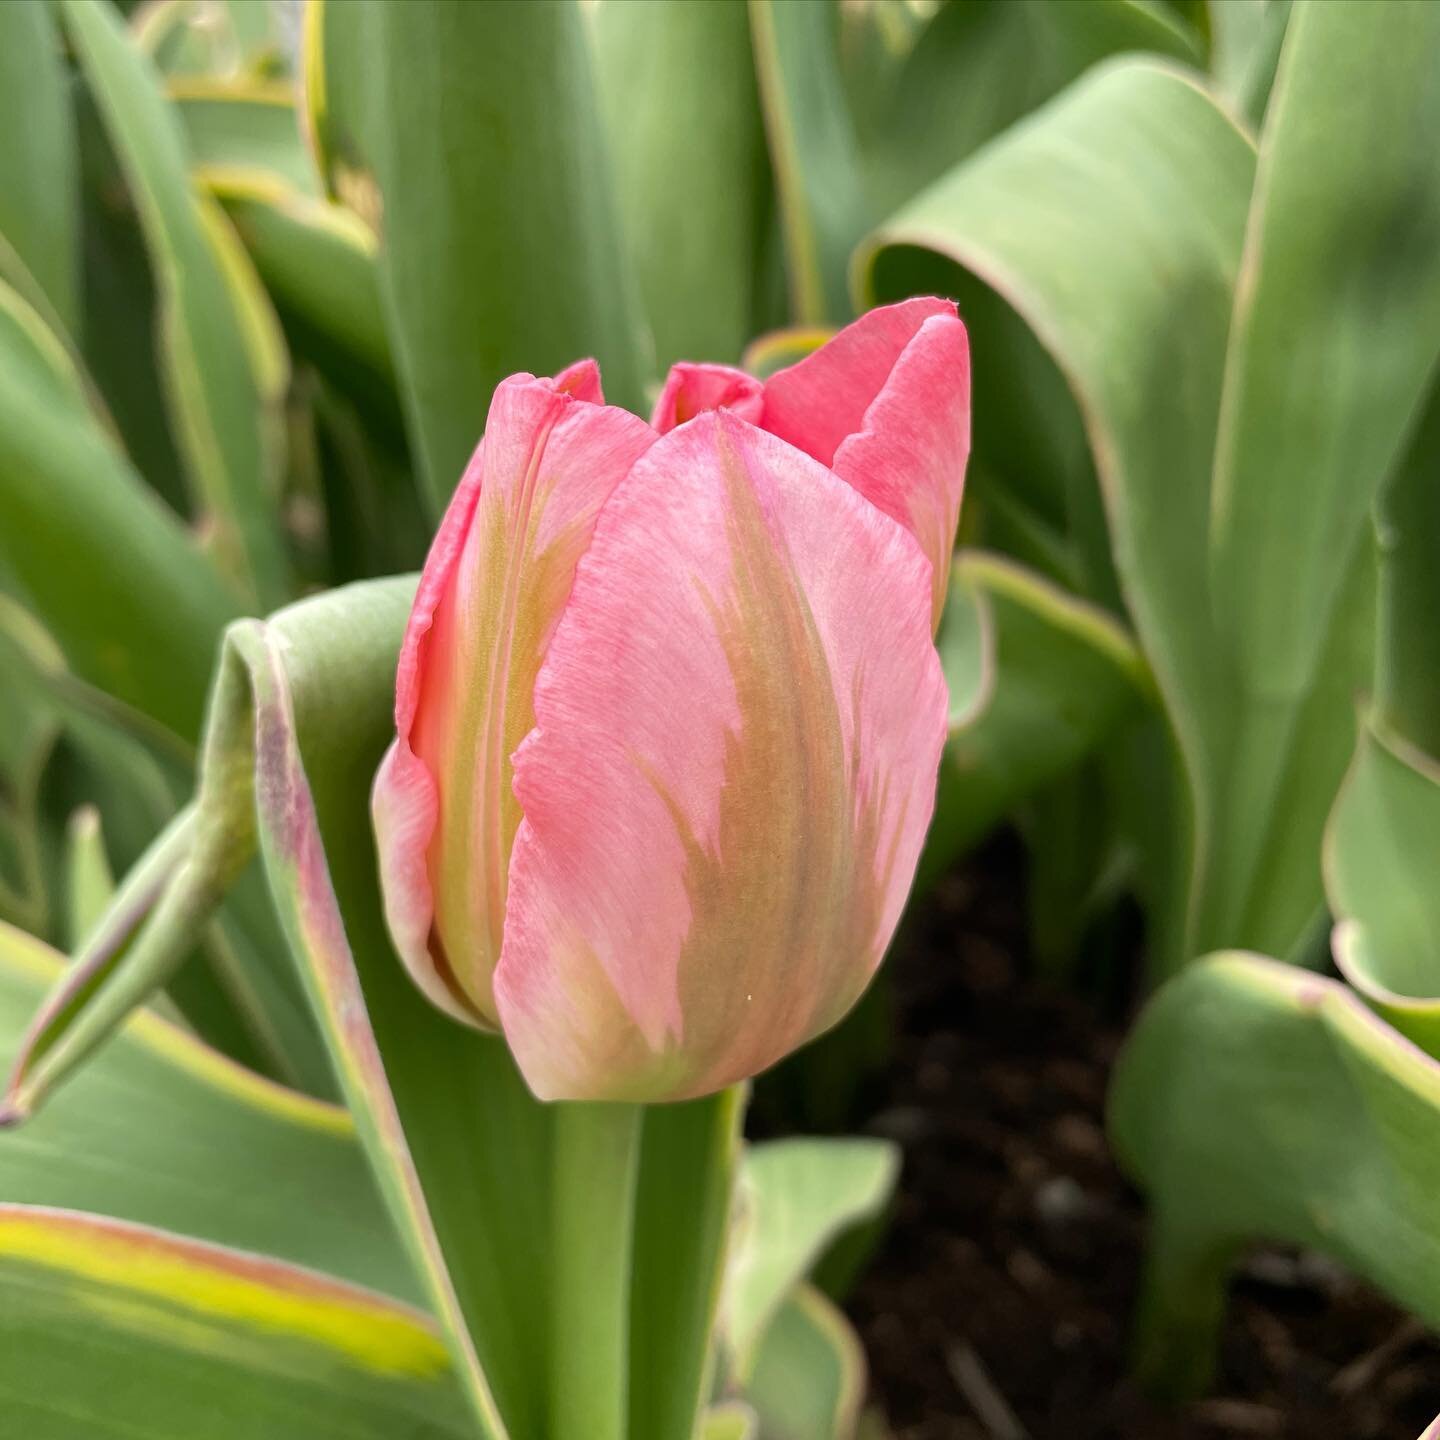 Whoa &mdash; I had to share a photo of this tulip. Just hours ago, it was still closed. (See previous post.) While training my farm hand (hubby Kris) to pull tulips after our morning walk and very delicious brunch @thenest.rhf, I spotted this apricot